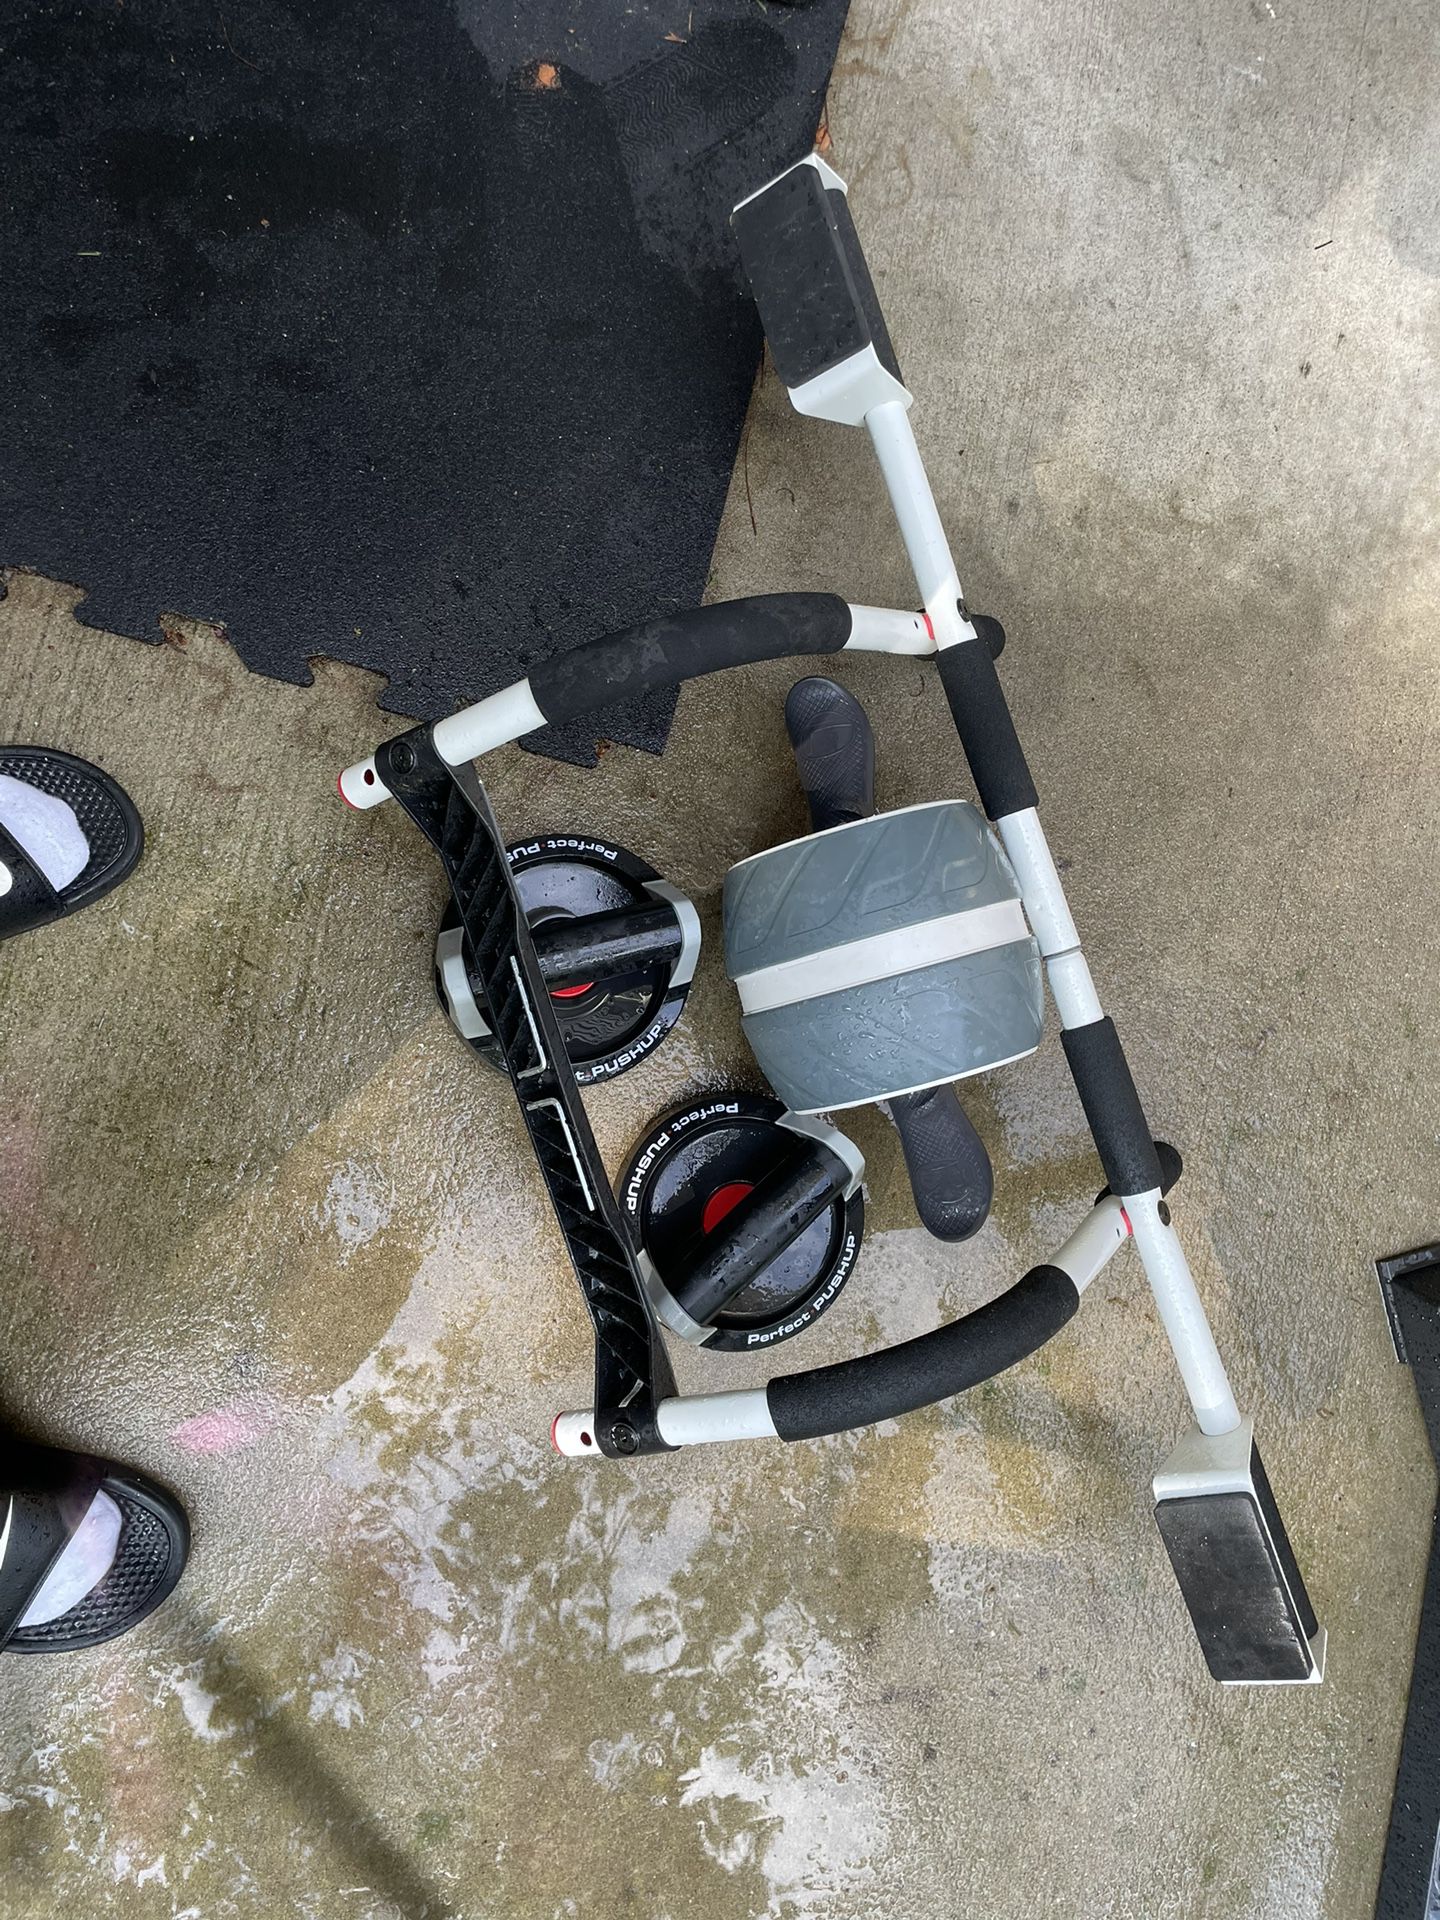 The Perfect  Workout Equipment Combo $60 OBO